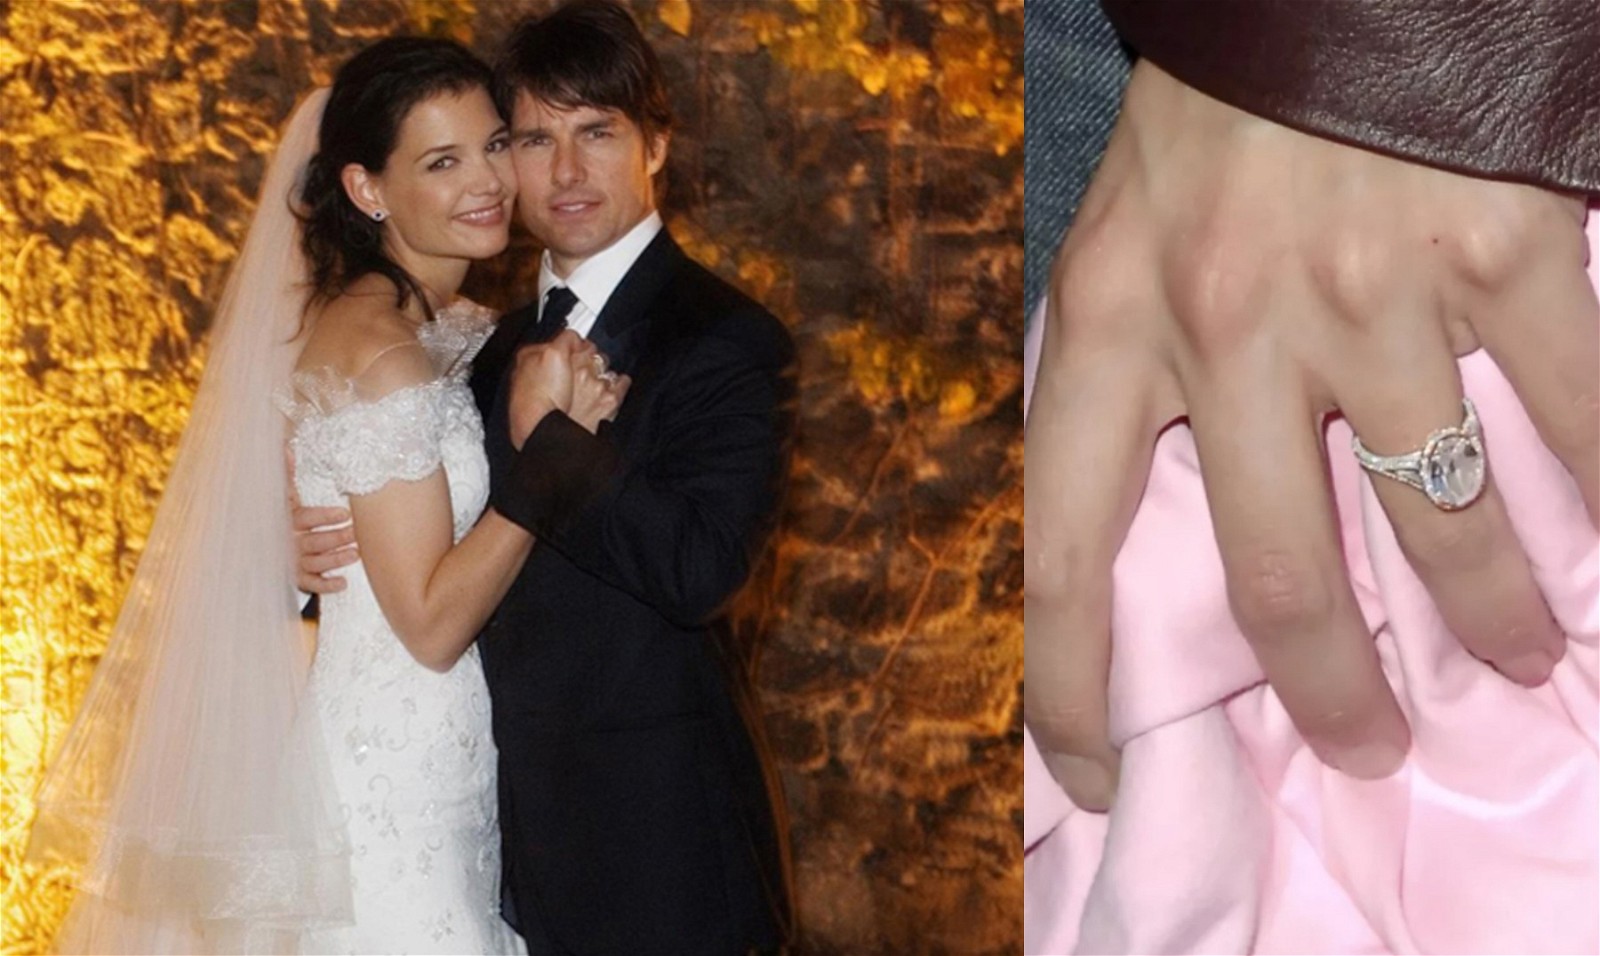 Katie Holmes' engagement ring from Tom Cruise 